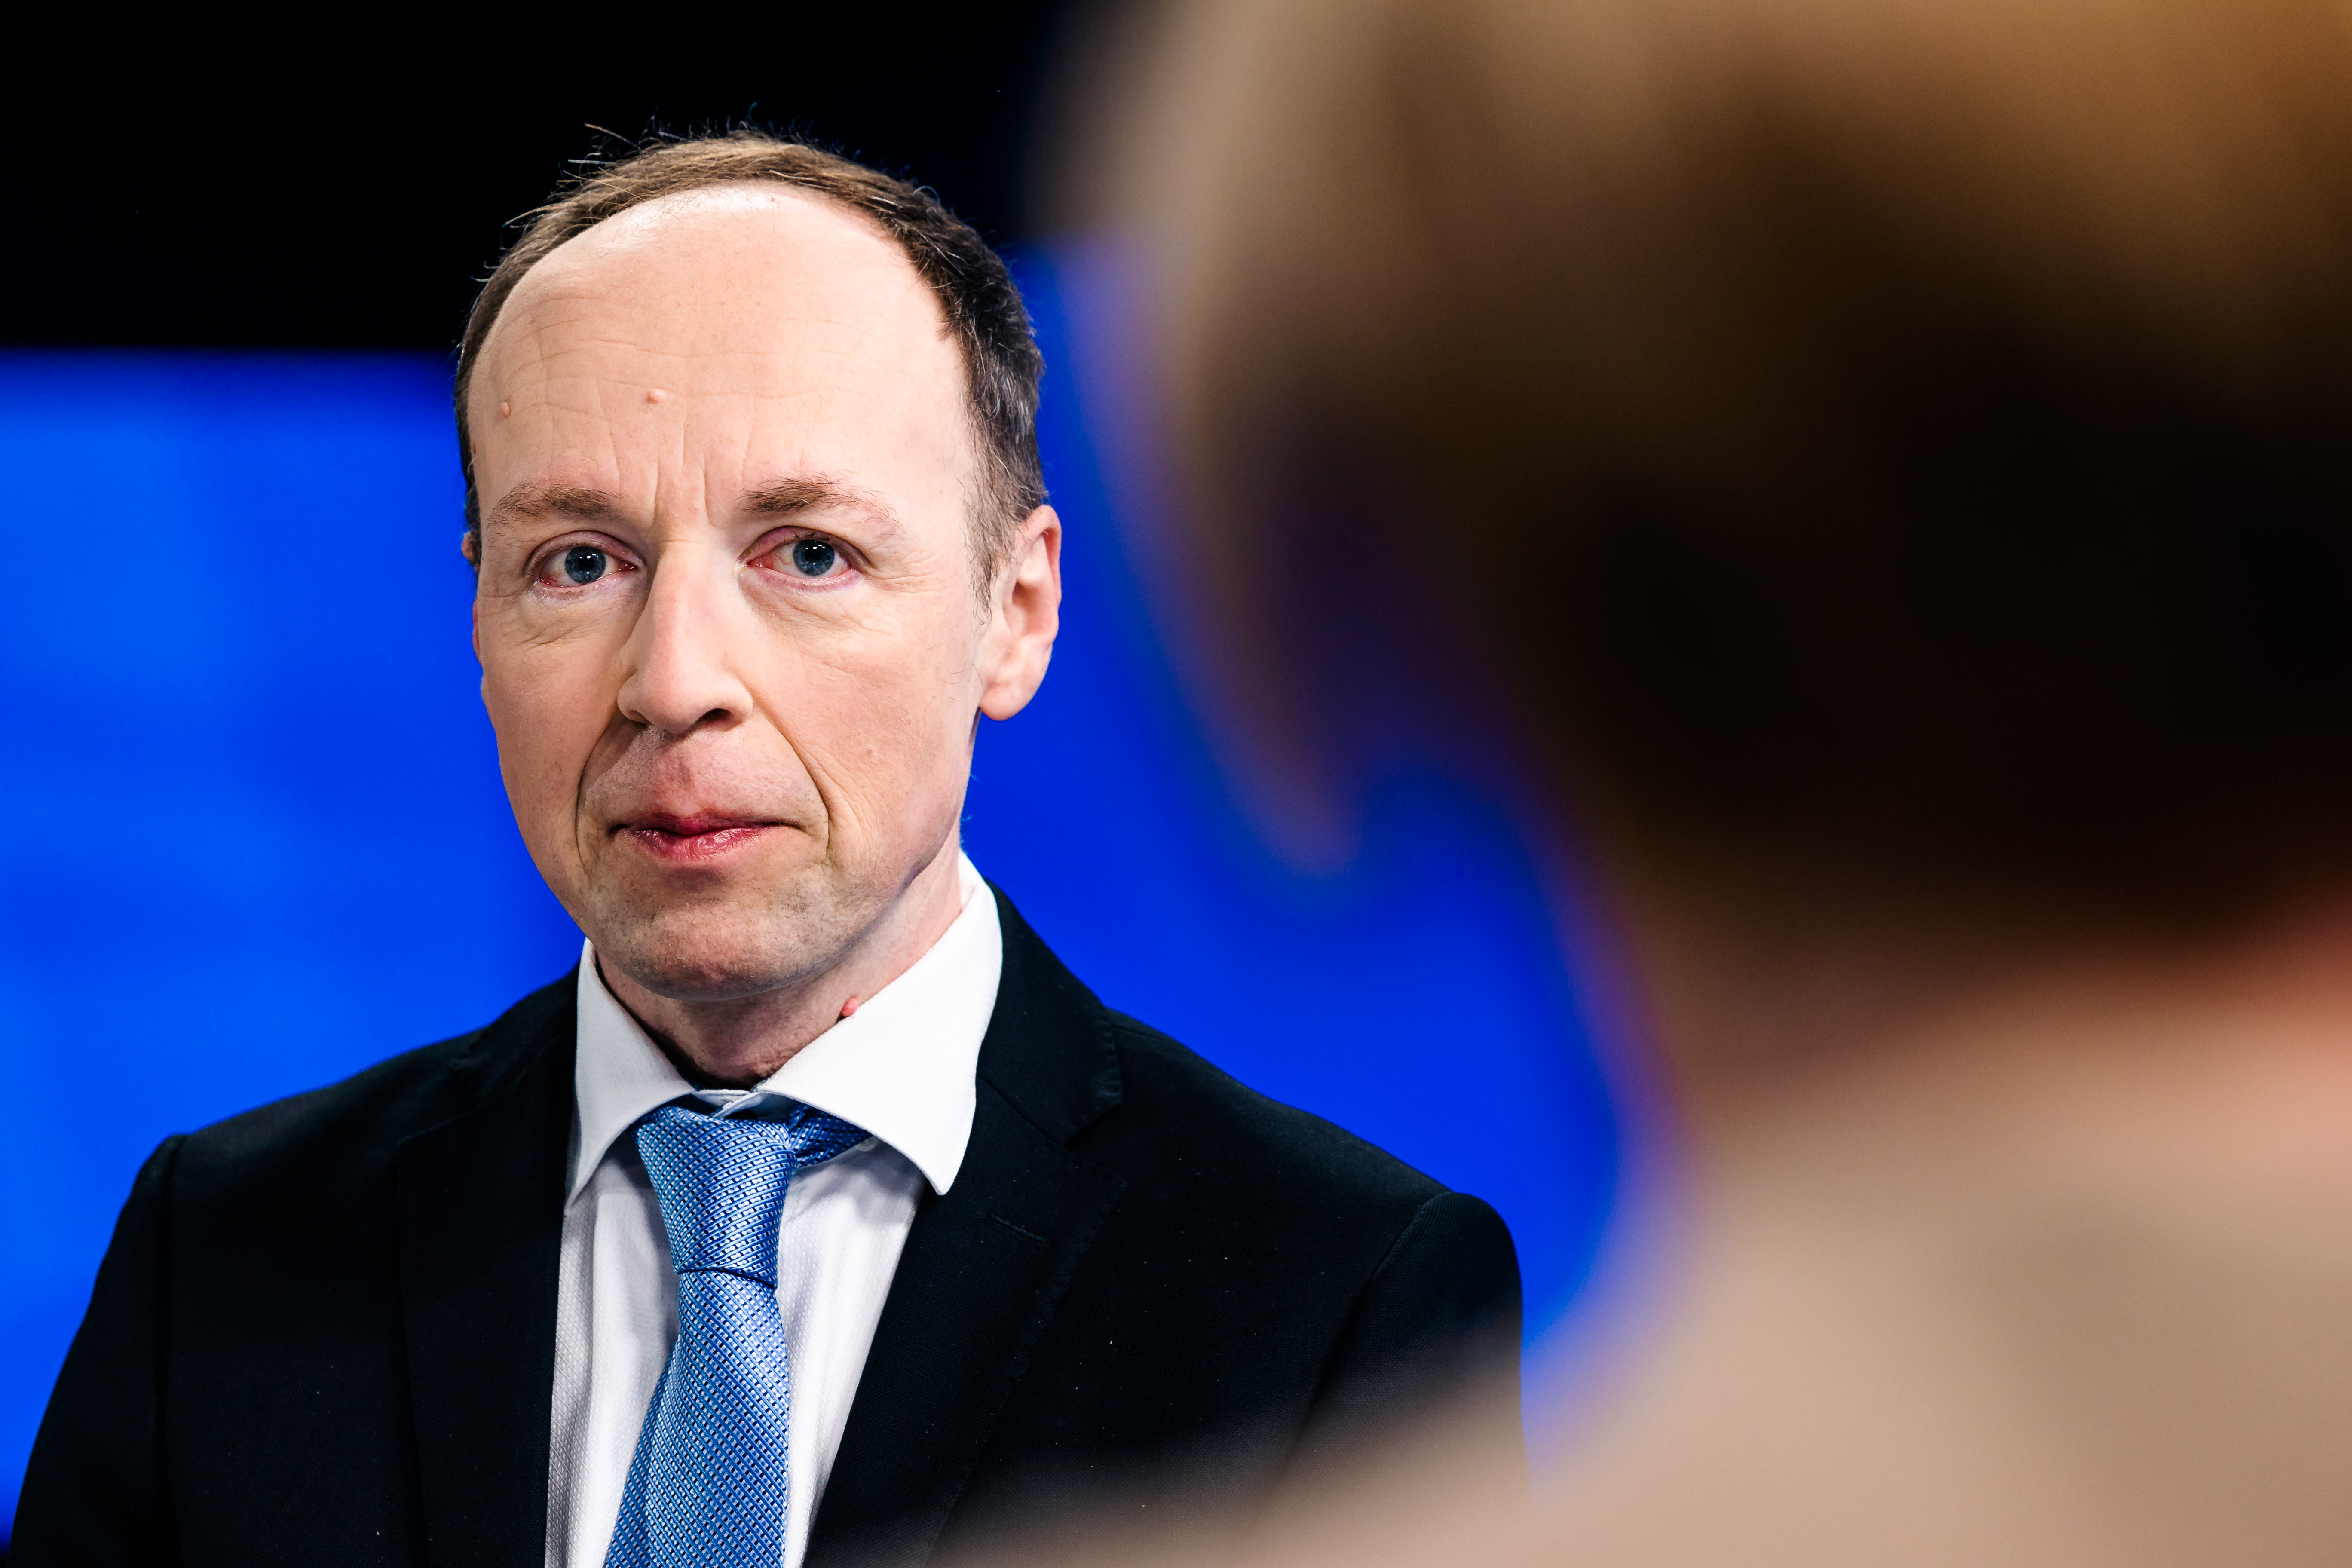 Halla-aho: Sanctions imposed on Russia "ineffective"